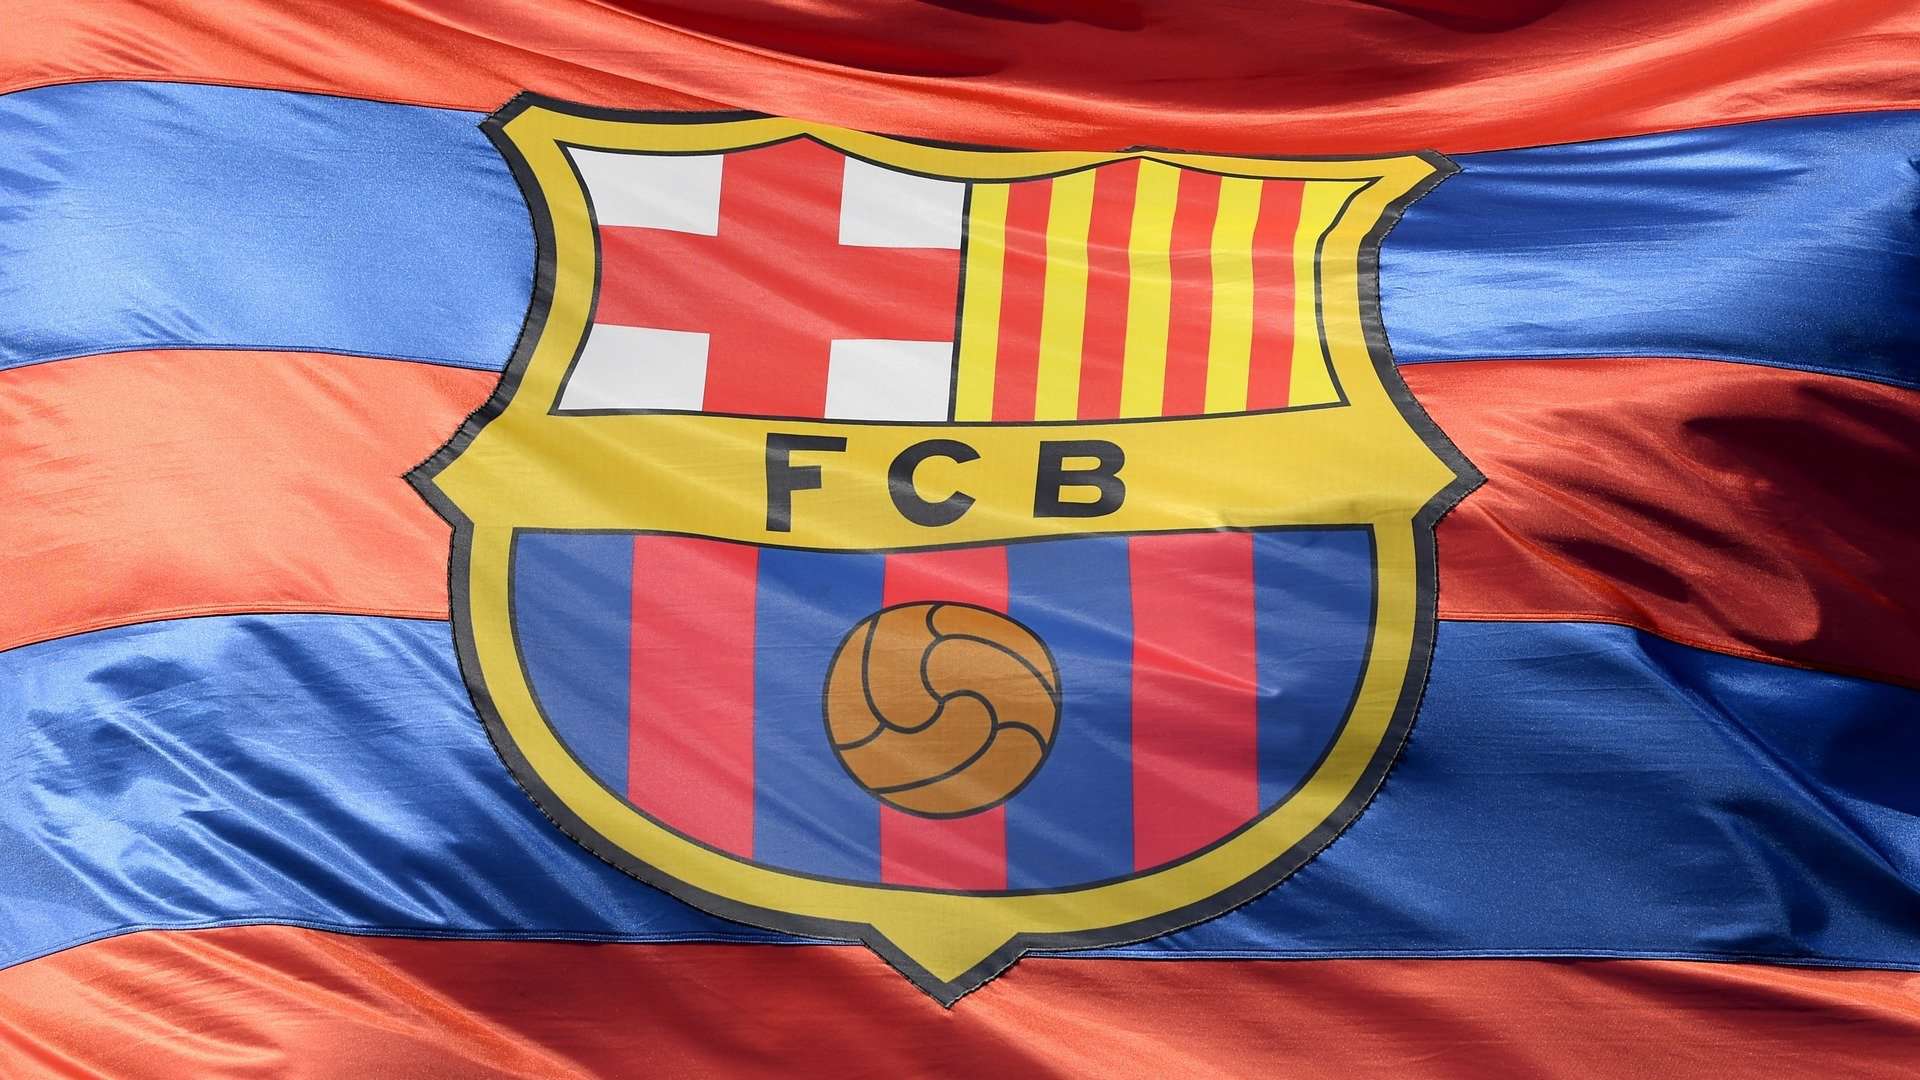 FC Barcelona Has Plans to Launch Its Own Metaverse and Cryptocurrency